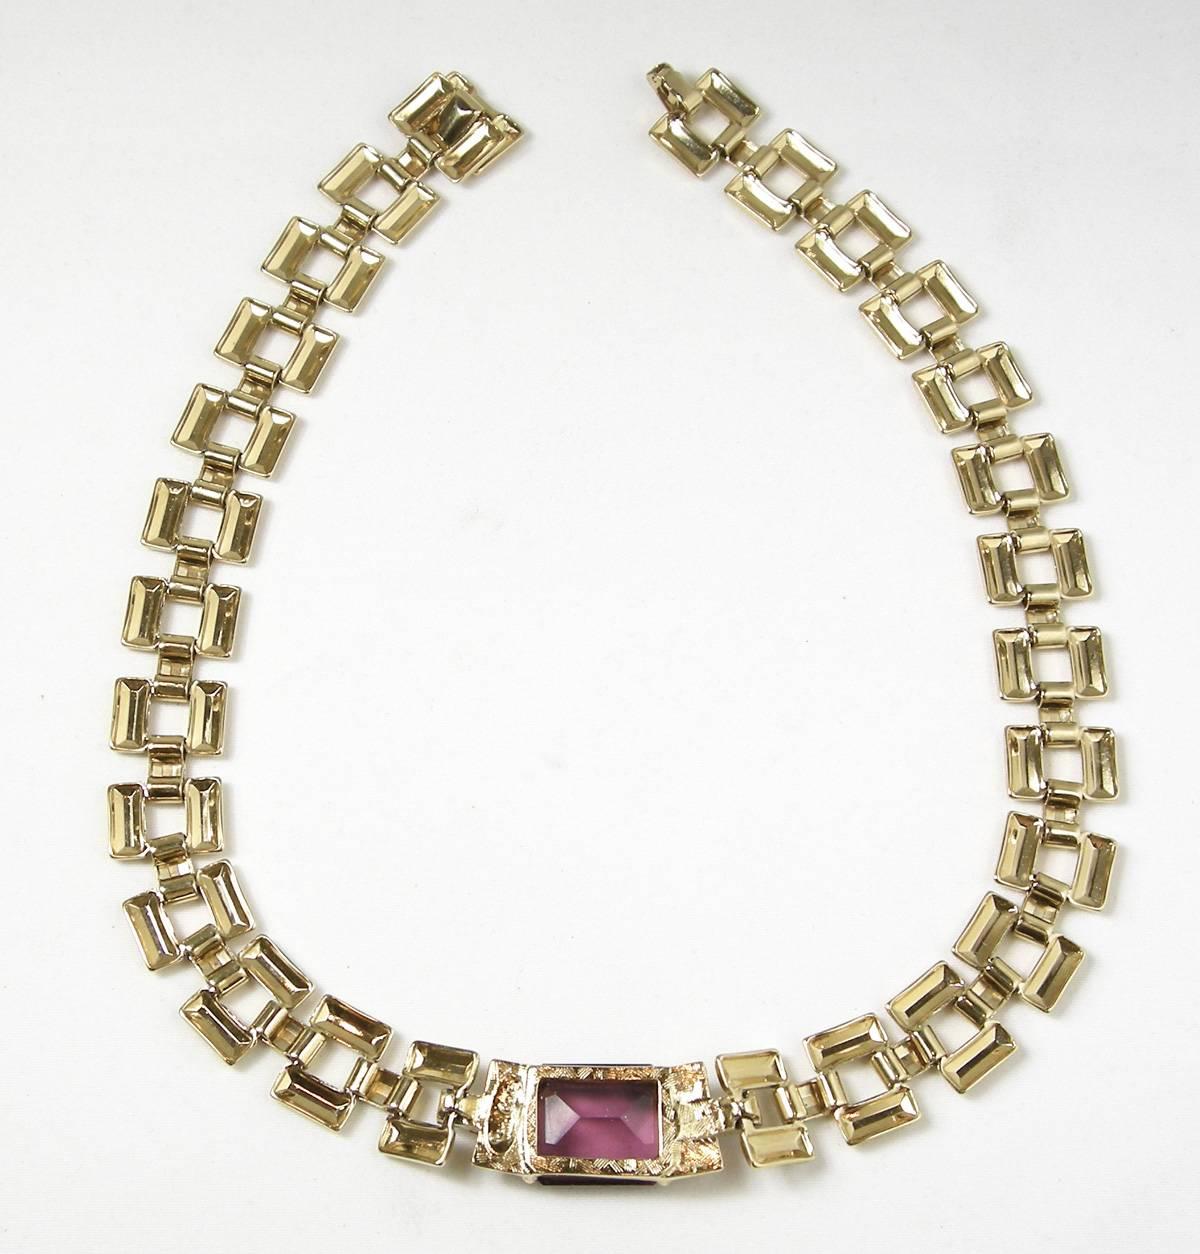 It is rare to find any Cardin jewelry and we were lucky to find this special necklace.  This is a beautiful vintage Pierre Cardin box chain necklace that features a large sized faux amethyst with crystals. It measures 16” x 3/4”. The amethyst